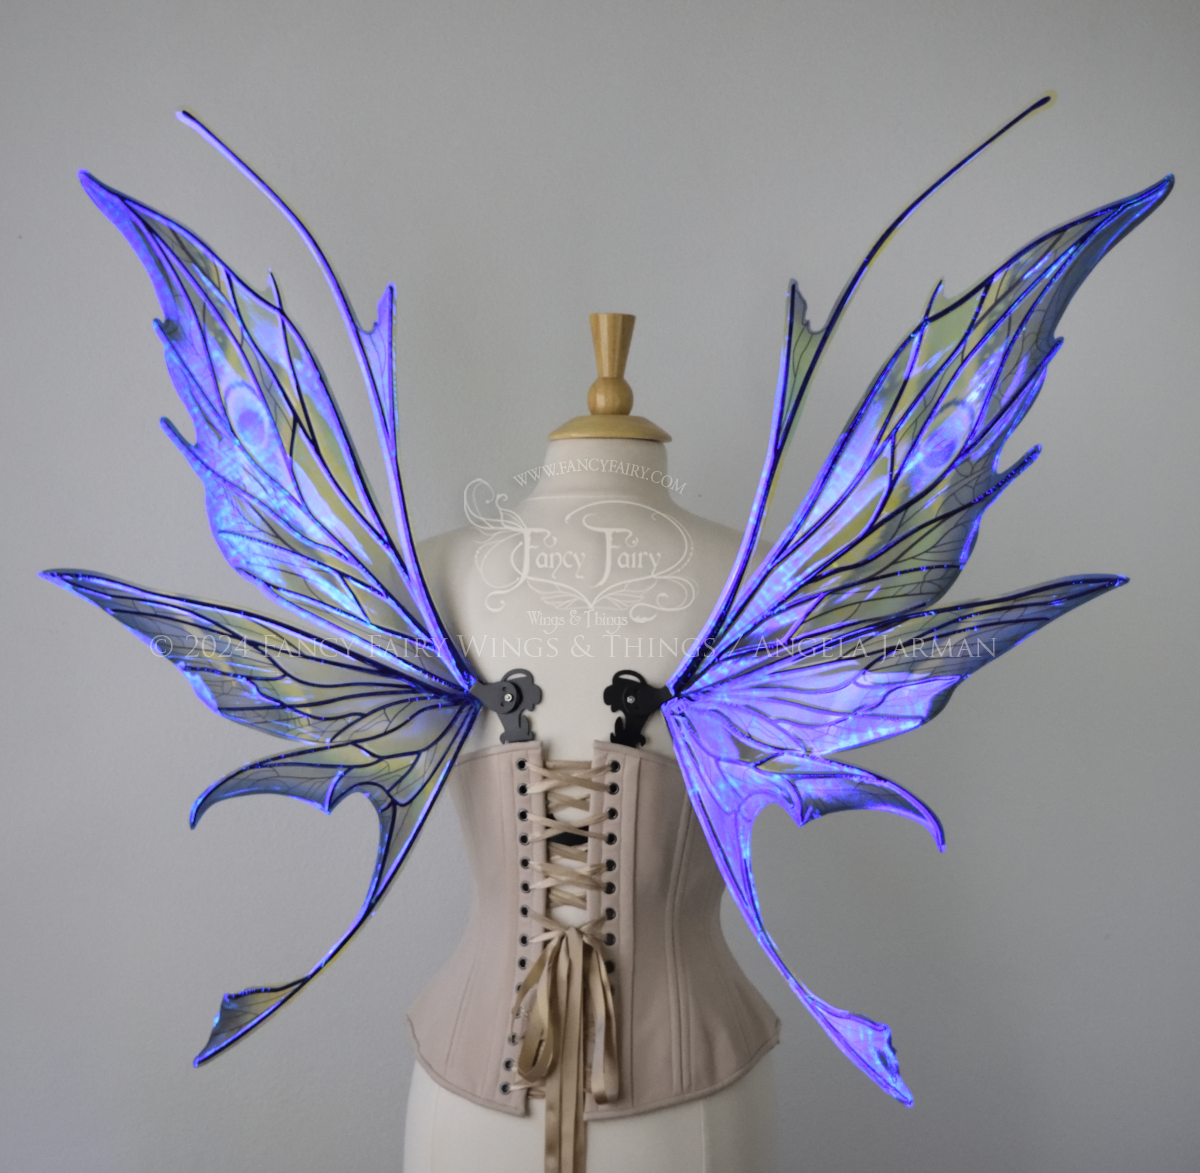 Back view of large spikey blue painted iridescent fairy wings with antennae along the top & black detailed veins, displayed on dress form. 